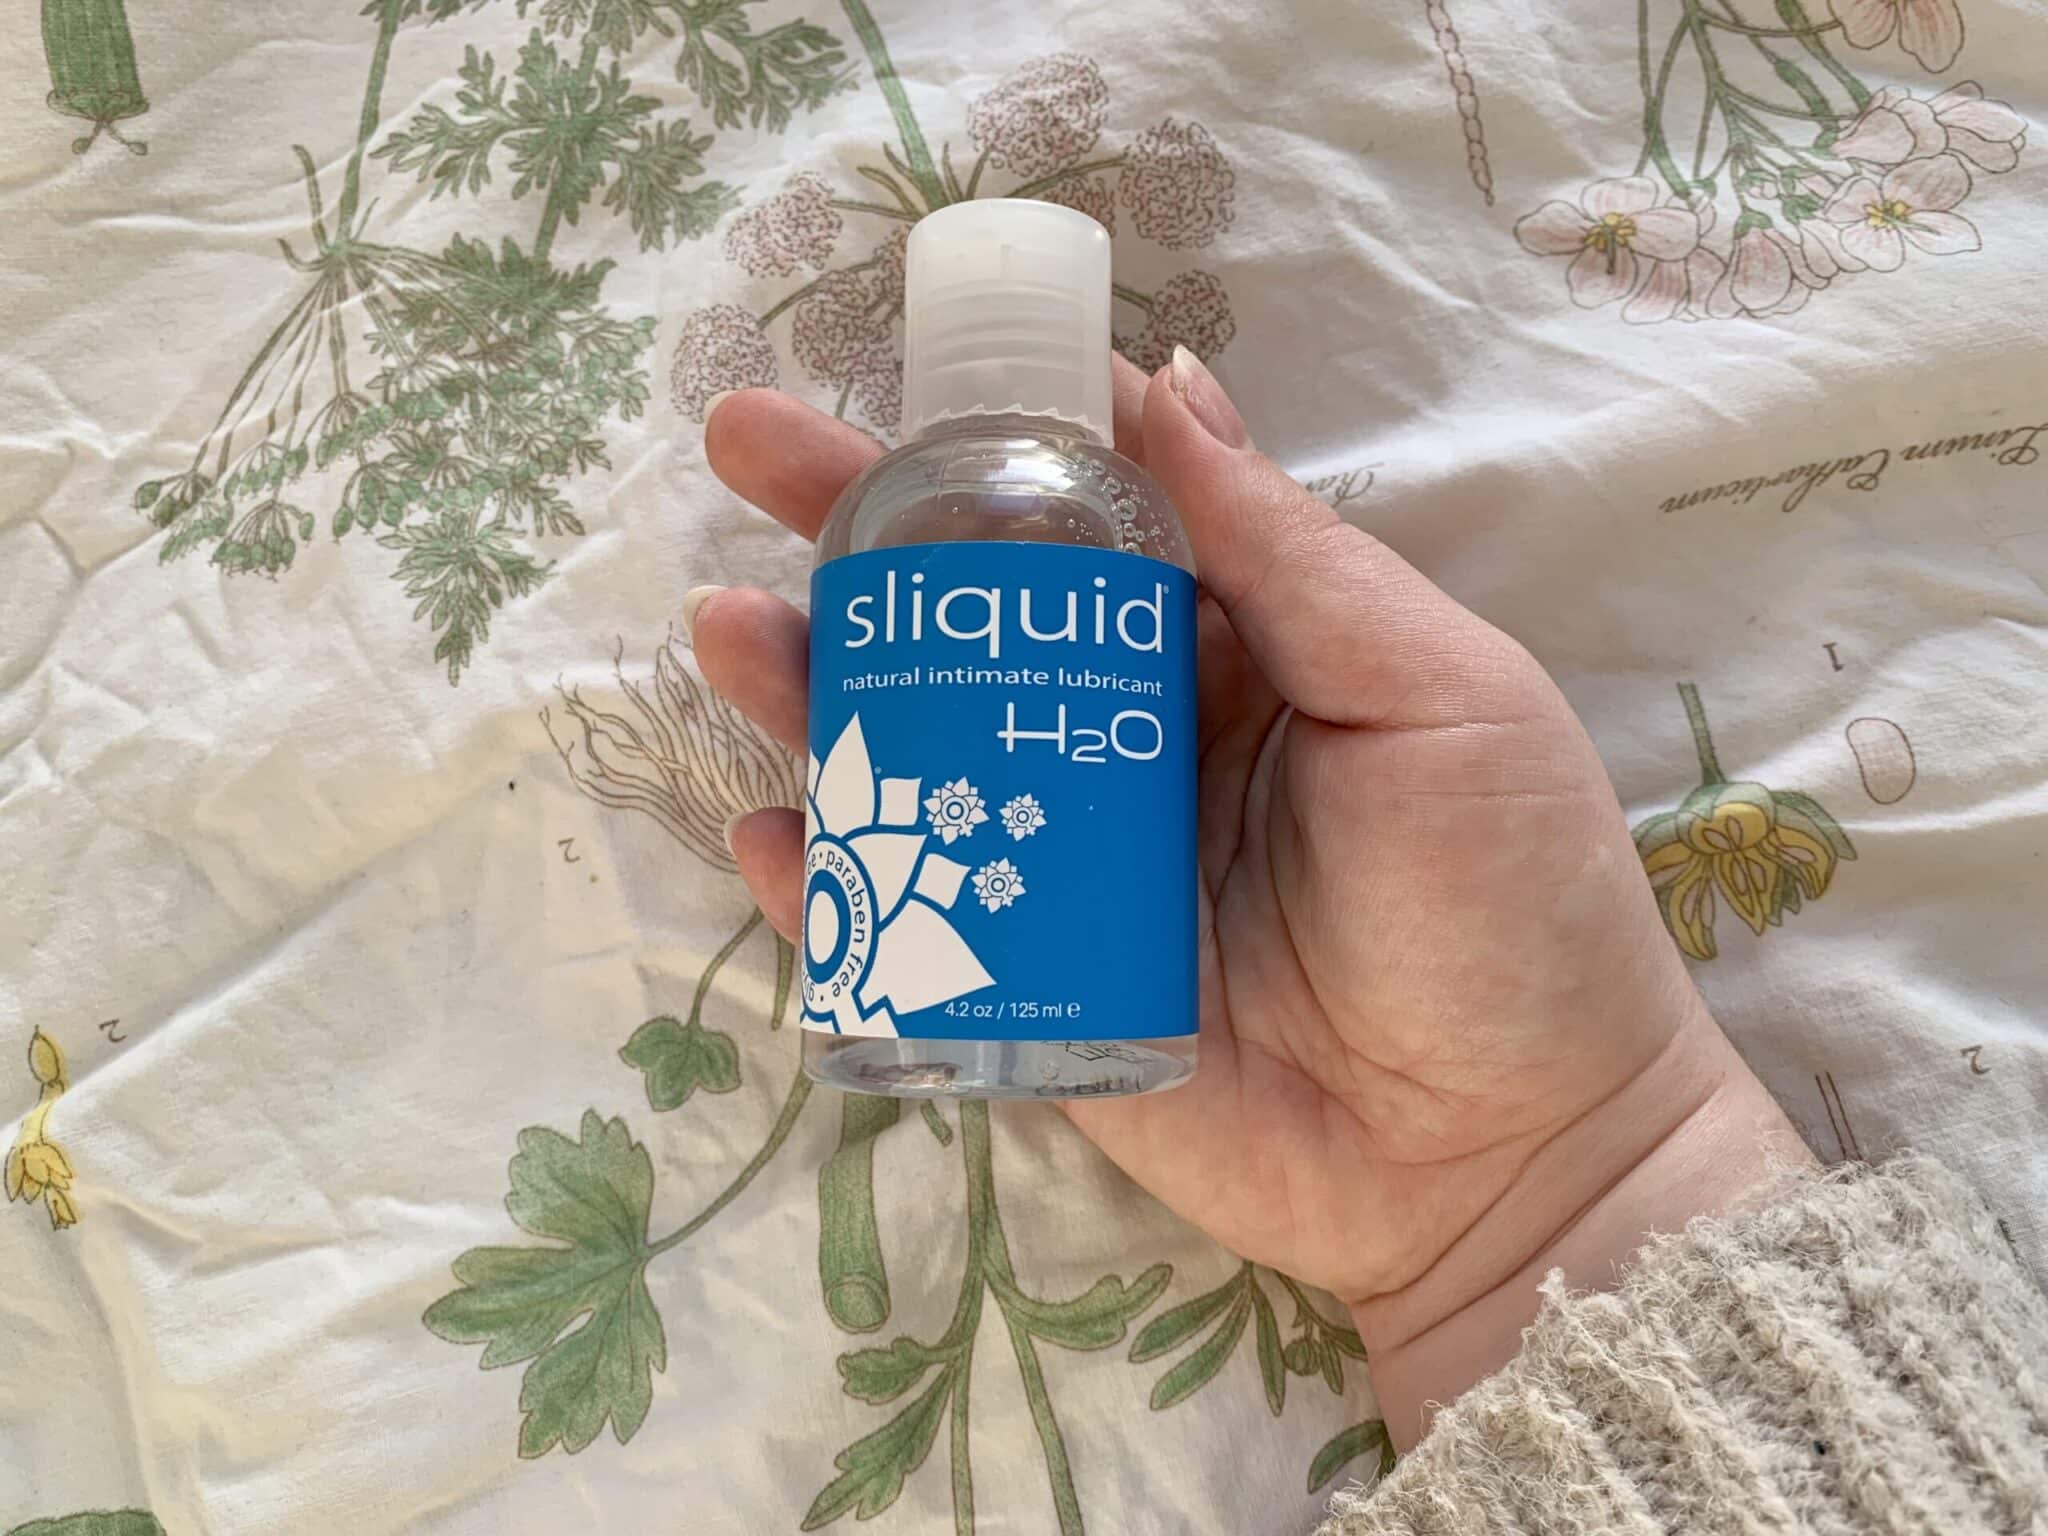 My Personal Experiences with Sliquid H2O